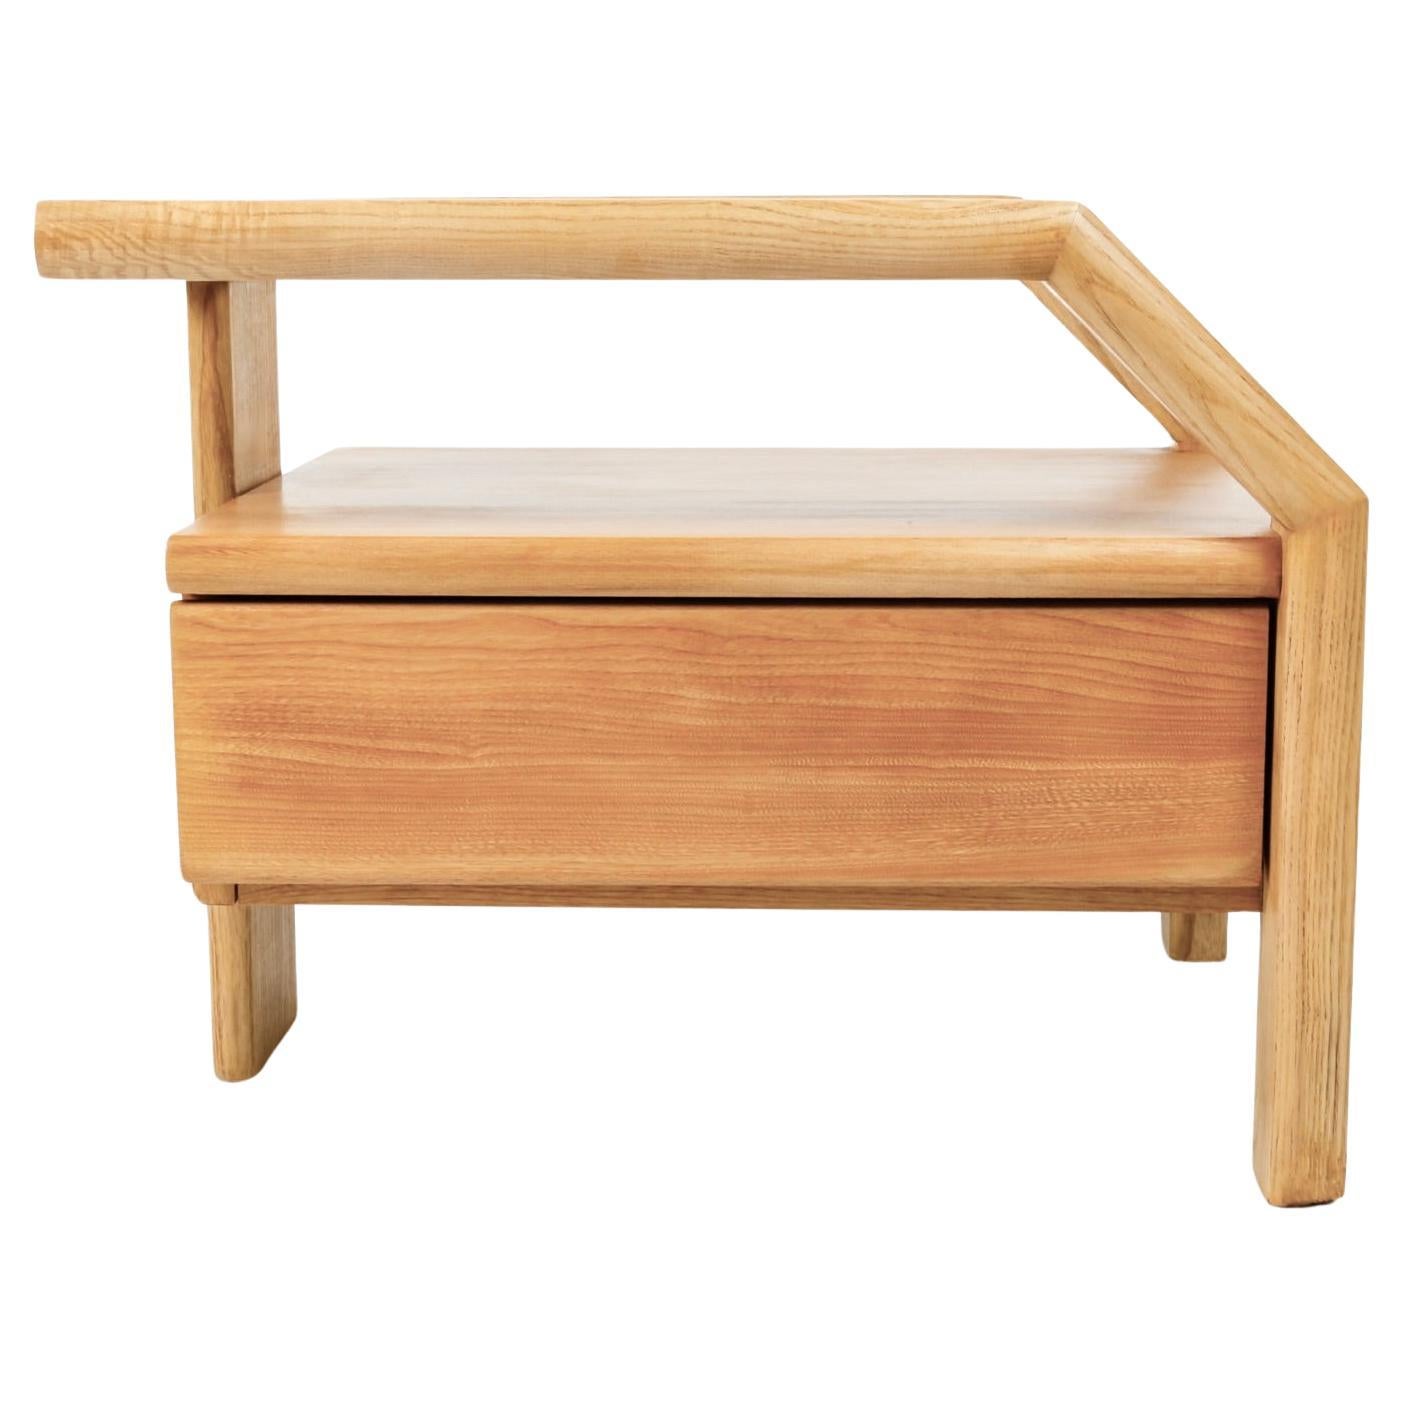 Composed of a suspended wooden box opening onto a drawer at the front of the bedside table.
Rectangular wooden dishes, rounded at the corners, run along the bedside table top, down at an angle, then rest on two lateral legs on the side of the